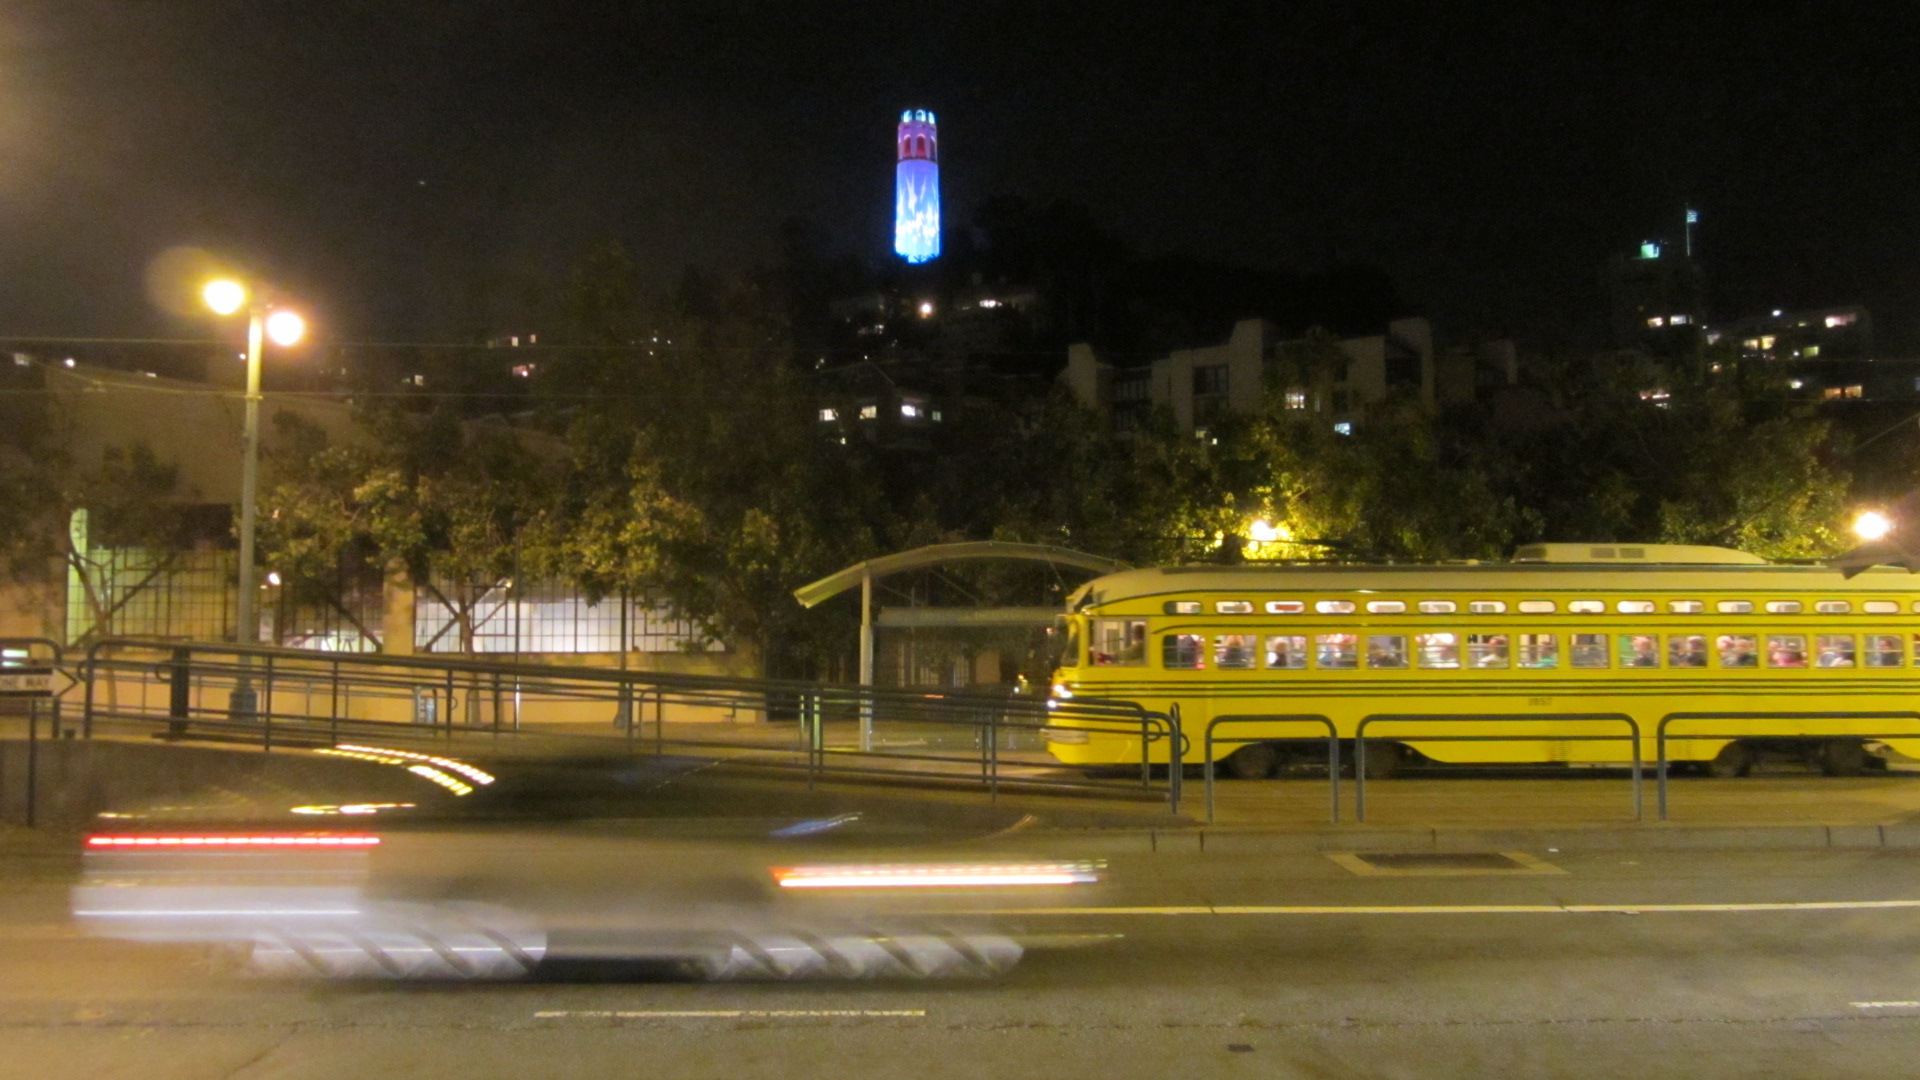 Coit Tower was lit up in red, white and blue during Fourth of July week.